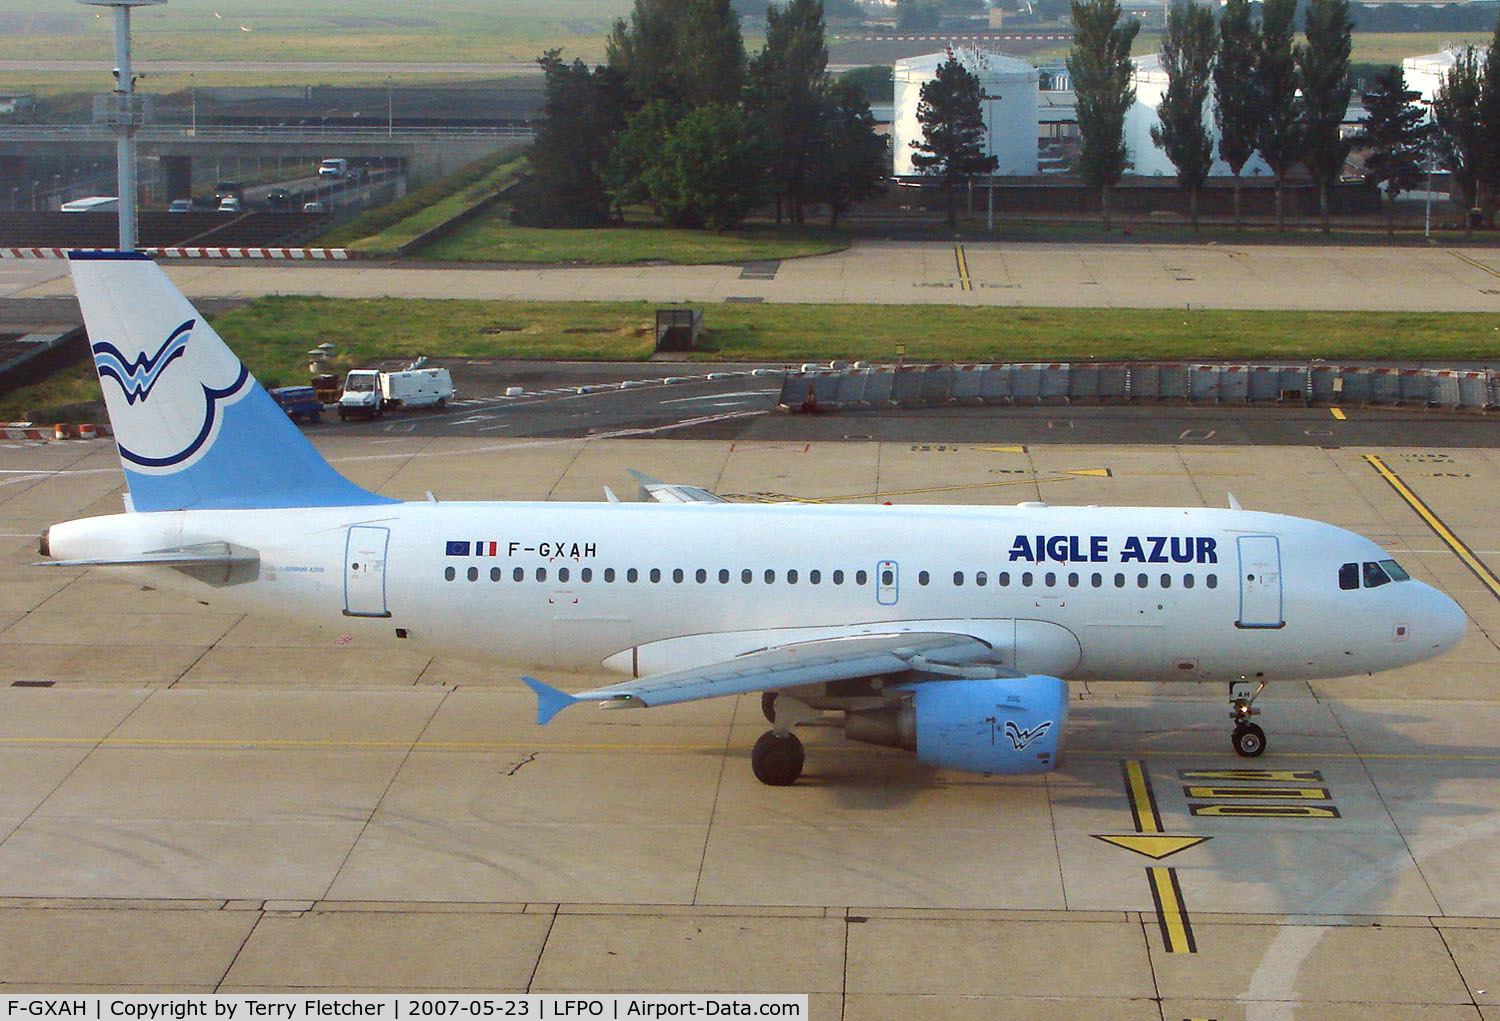 F-GXAH, 2002 Airbus A319-112 C/N 1846, French Charter Airline at Paris Orly in May 2008